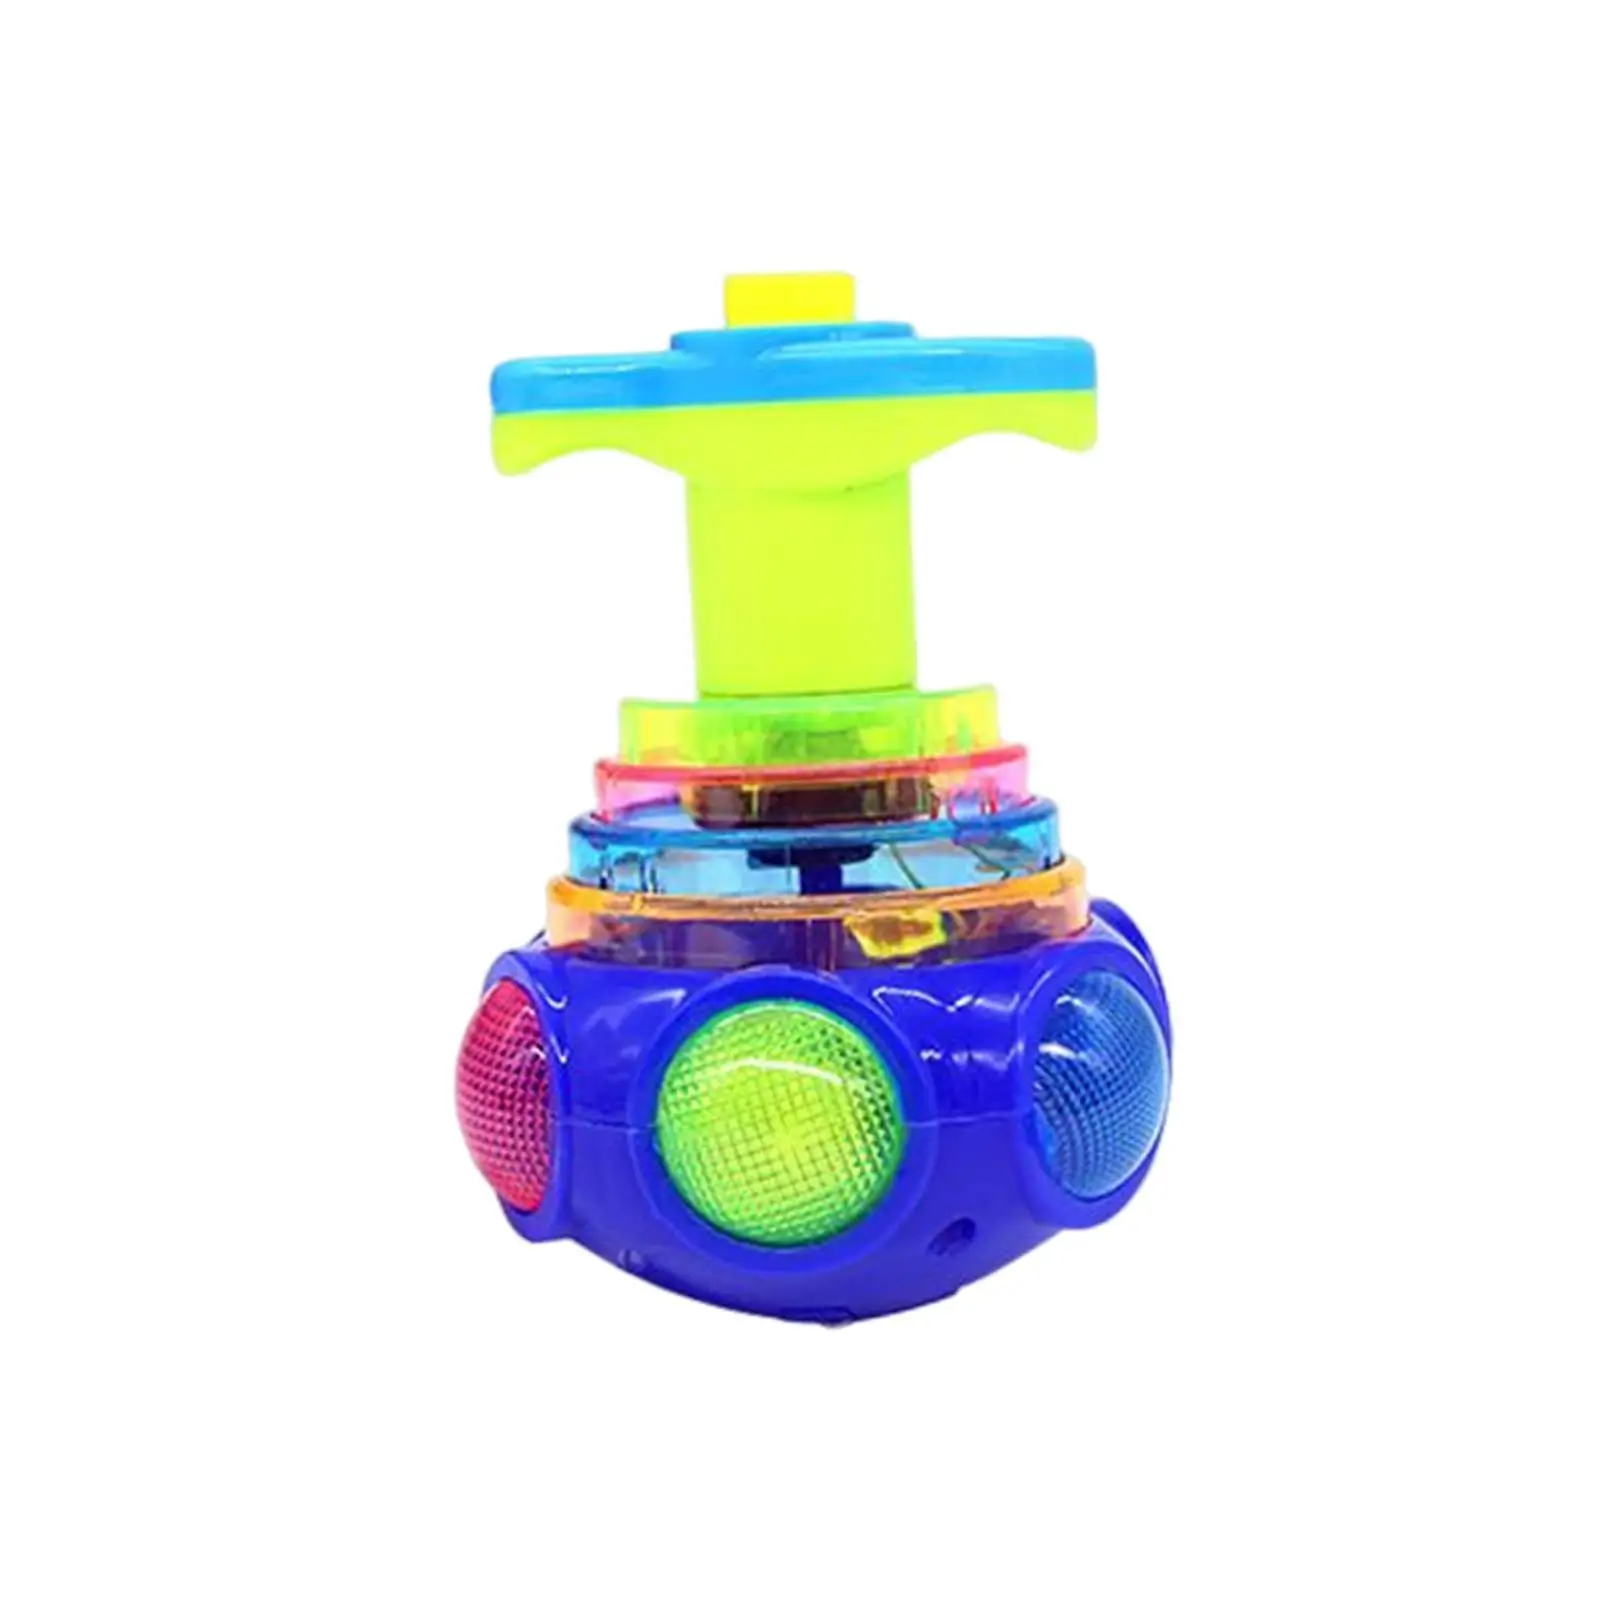 Spin Top Toy Gyro Peg Toy Spin Xmas Kids Gift Light and Music LED Music and